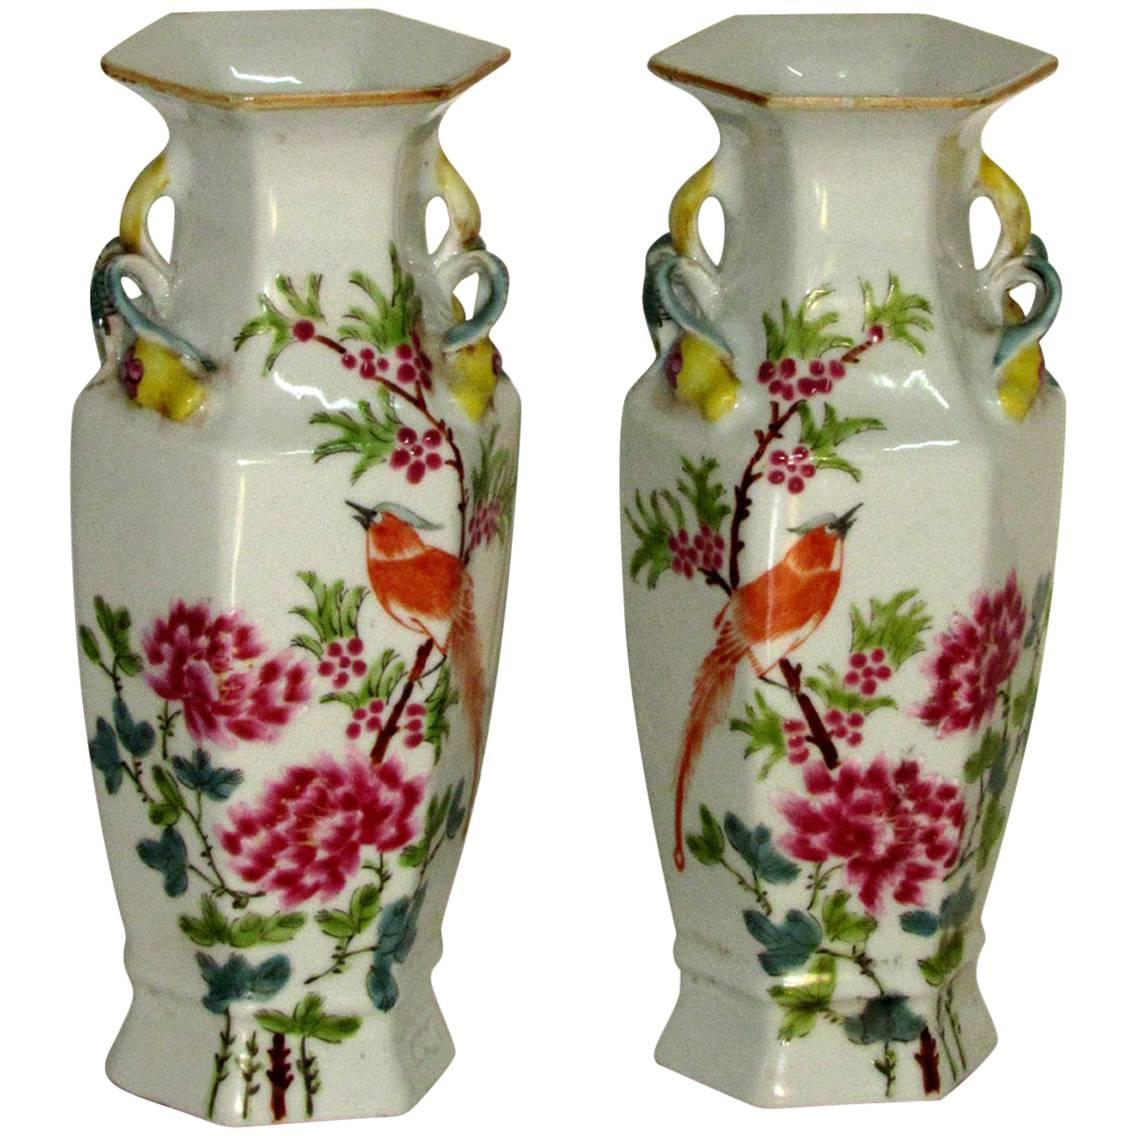 Pair of Early 20th Century Chinese Porcelain Vases